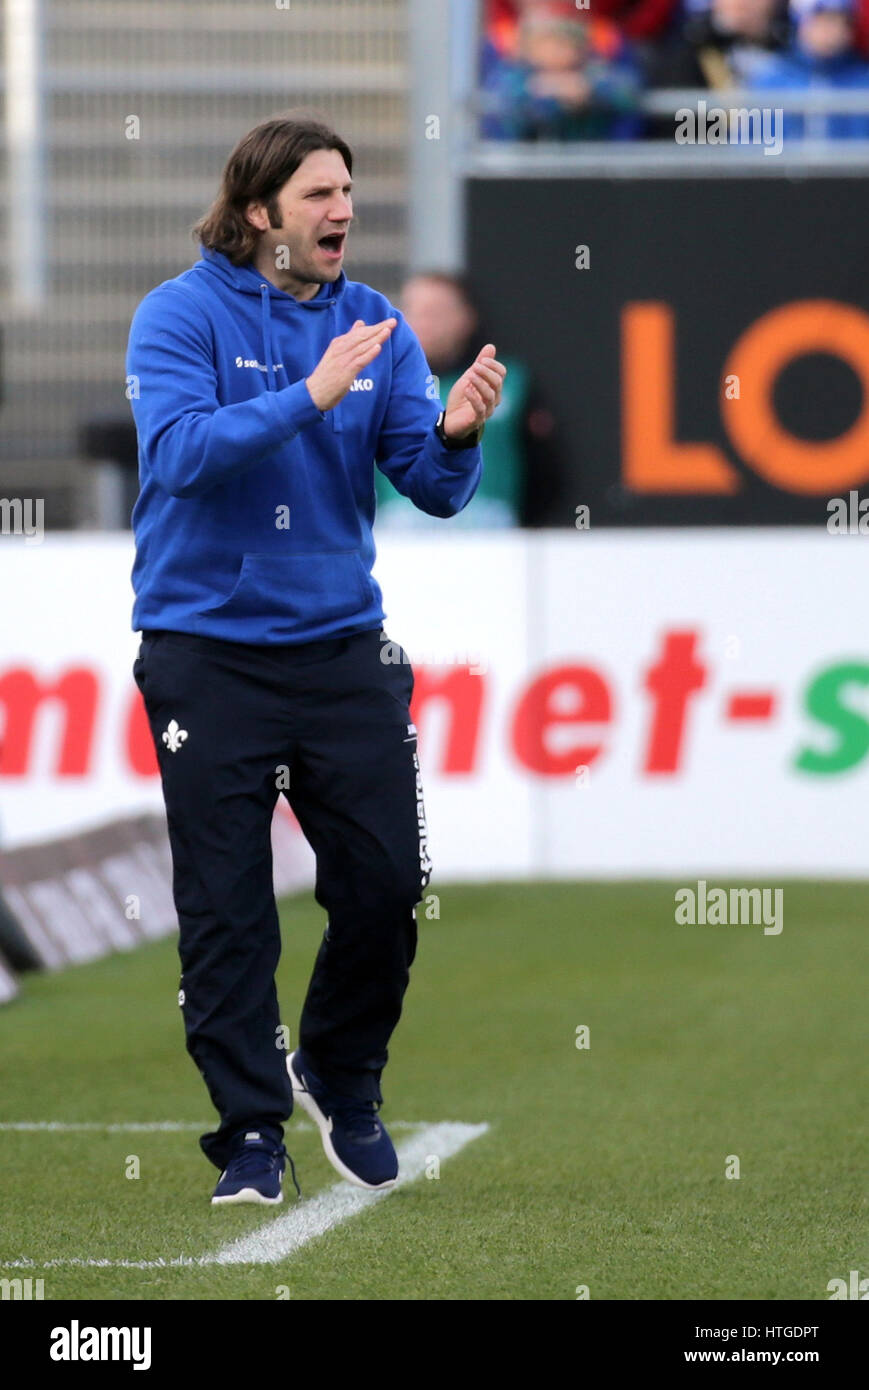 Darmstadt, Germany. 11th Mar, 2017. Darmstadt's manager Torsten Frings on the touchline during the German Bundesliga soccer match between SV Darmstadt 98 and 1. FSV Mainz 05 in the Jonathan Heimes Stadium in Darmstadt, Germany, 11 March 2017.  Photo: Hasan Bratic/dpa/Alamy Live News Stock Photo